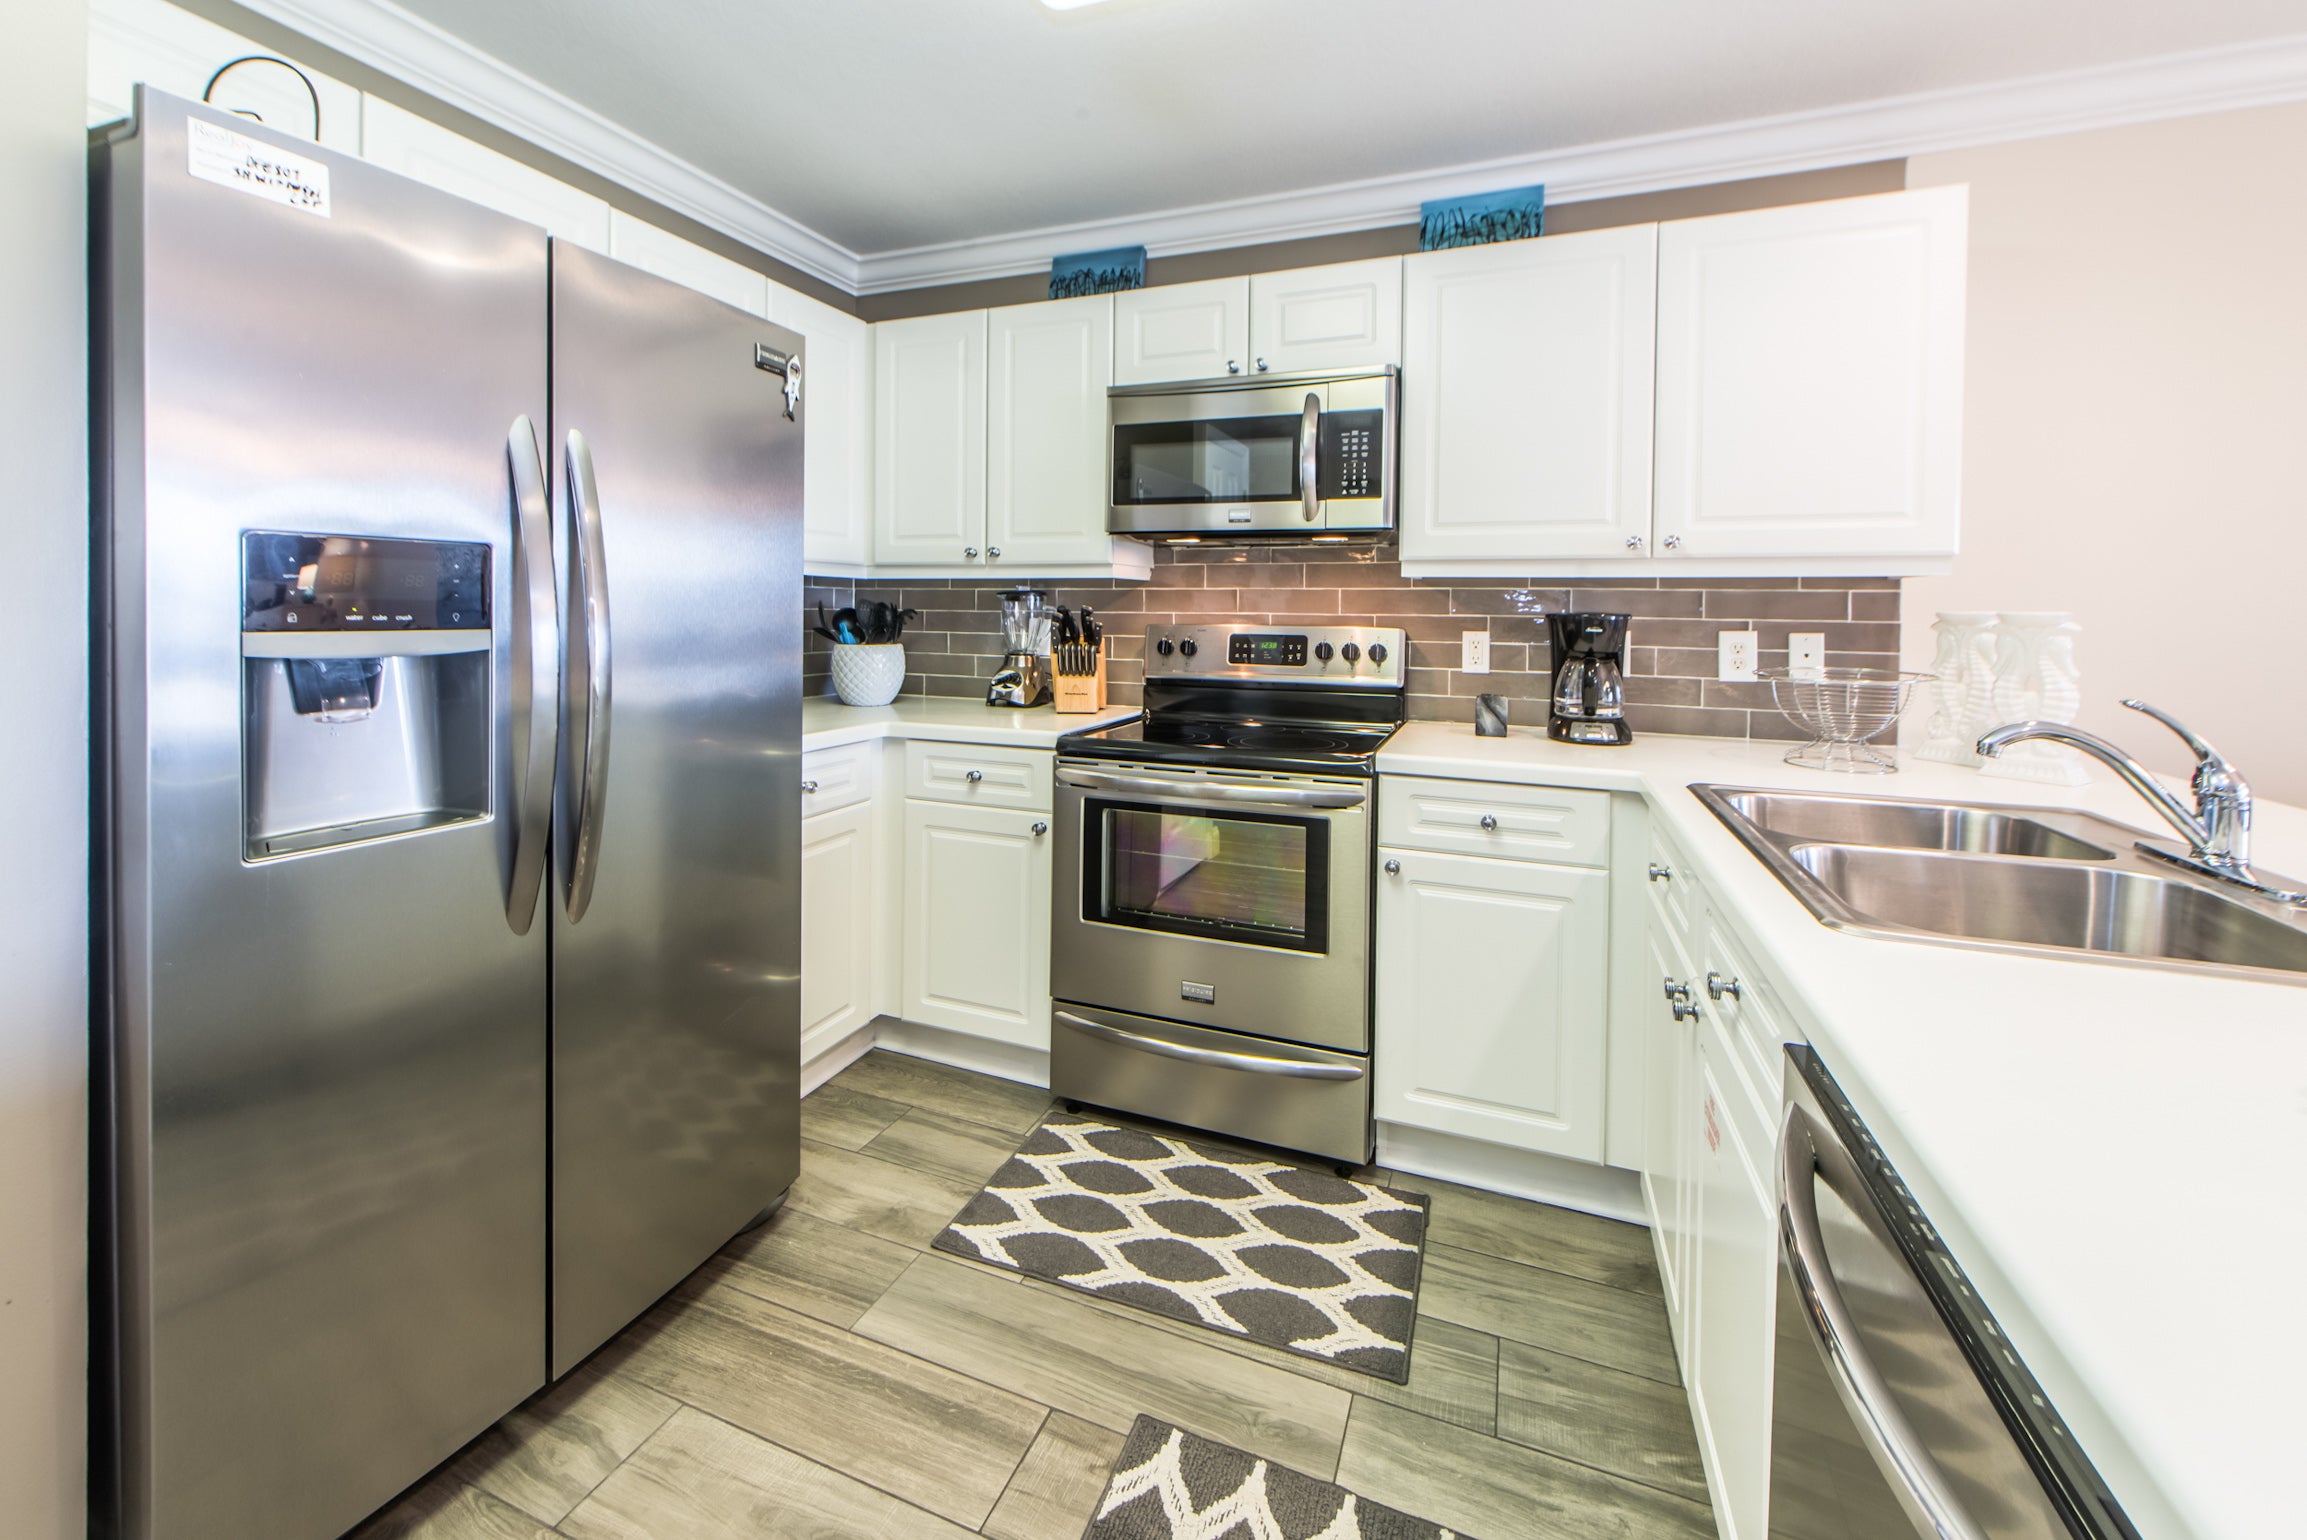 Stainless appliances in kitchen